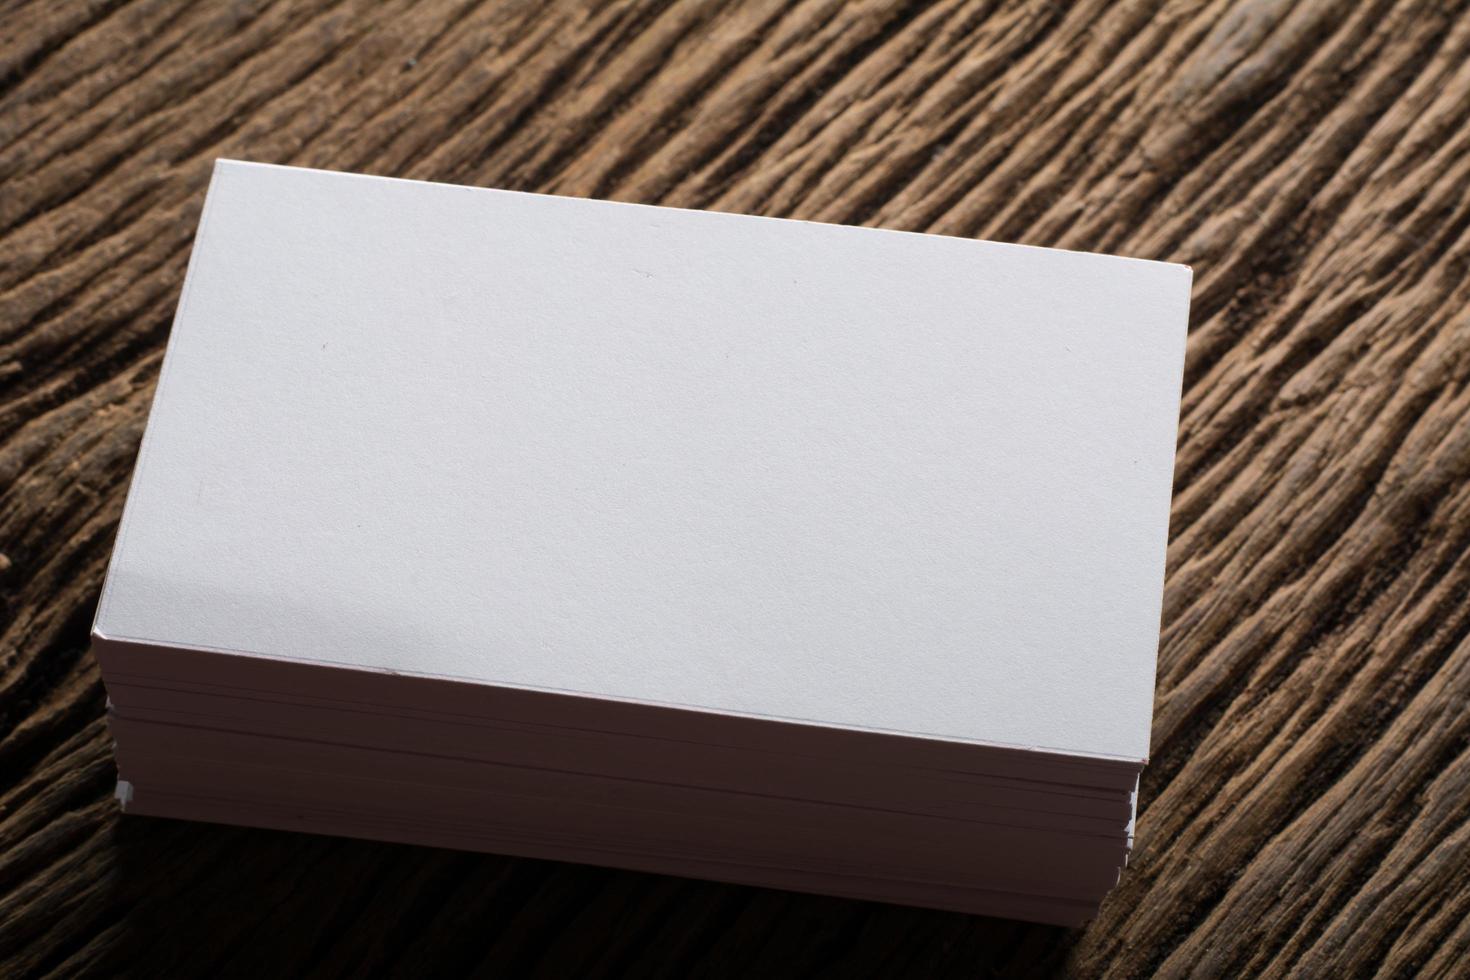 Blank white business card on wood background photo